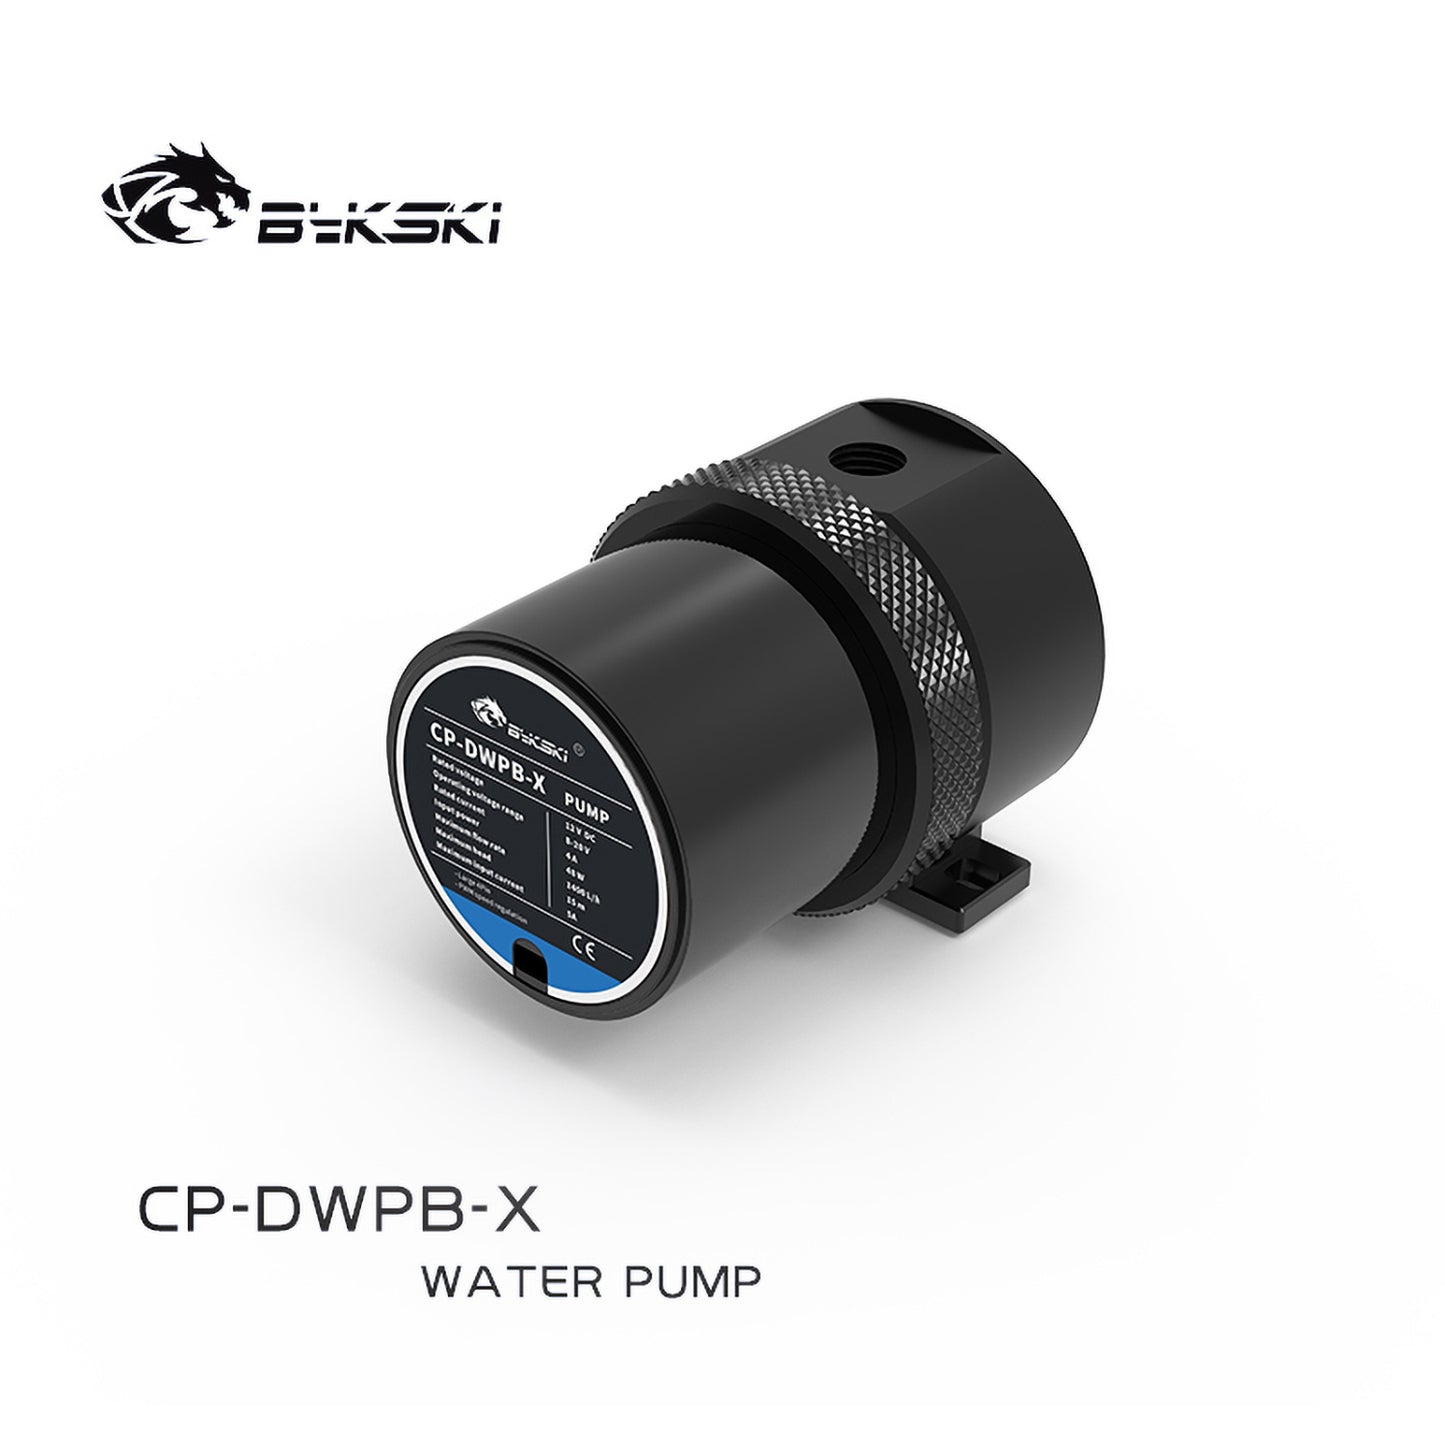 Bykski Industrial Level Pump, Powerful Water Cooling Pump With Heat Dissipation Metal Armor, Lift 15 meter, Flow 1400L/H, CP-DWPB-X